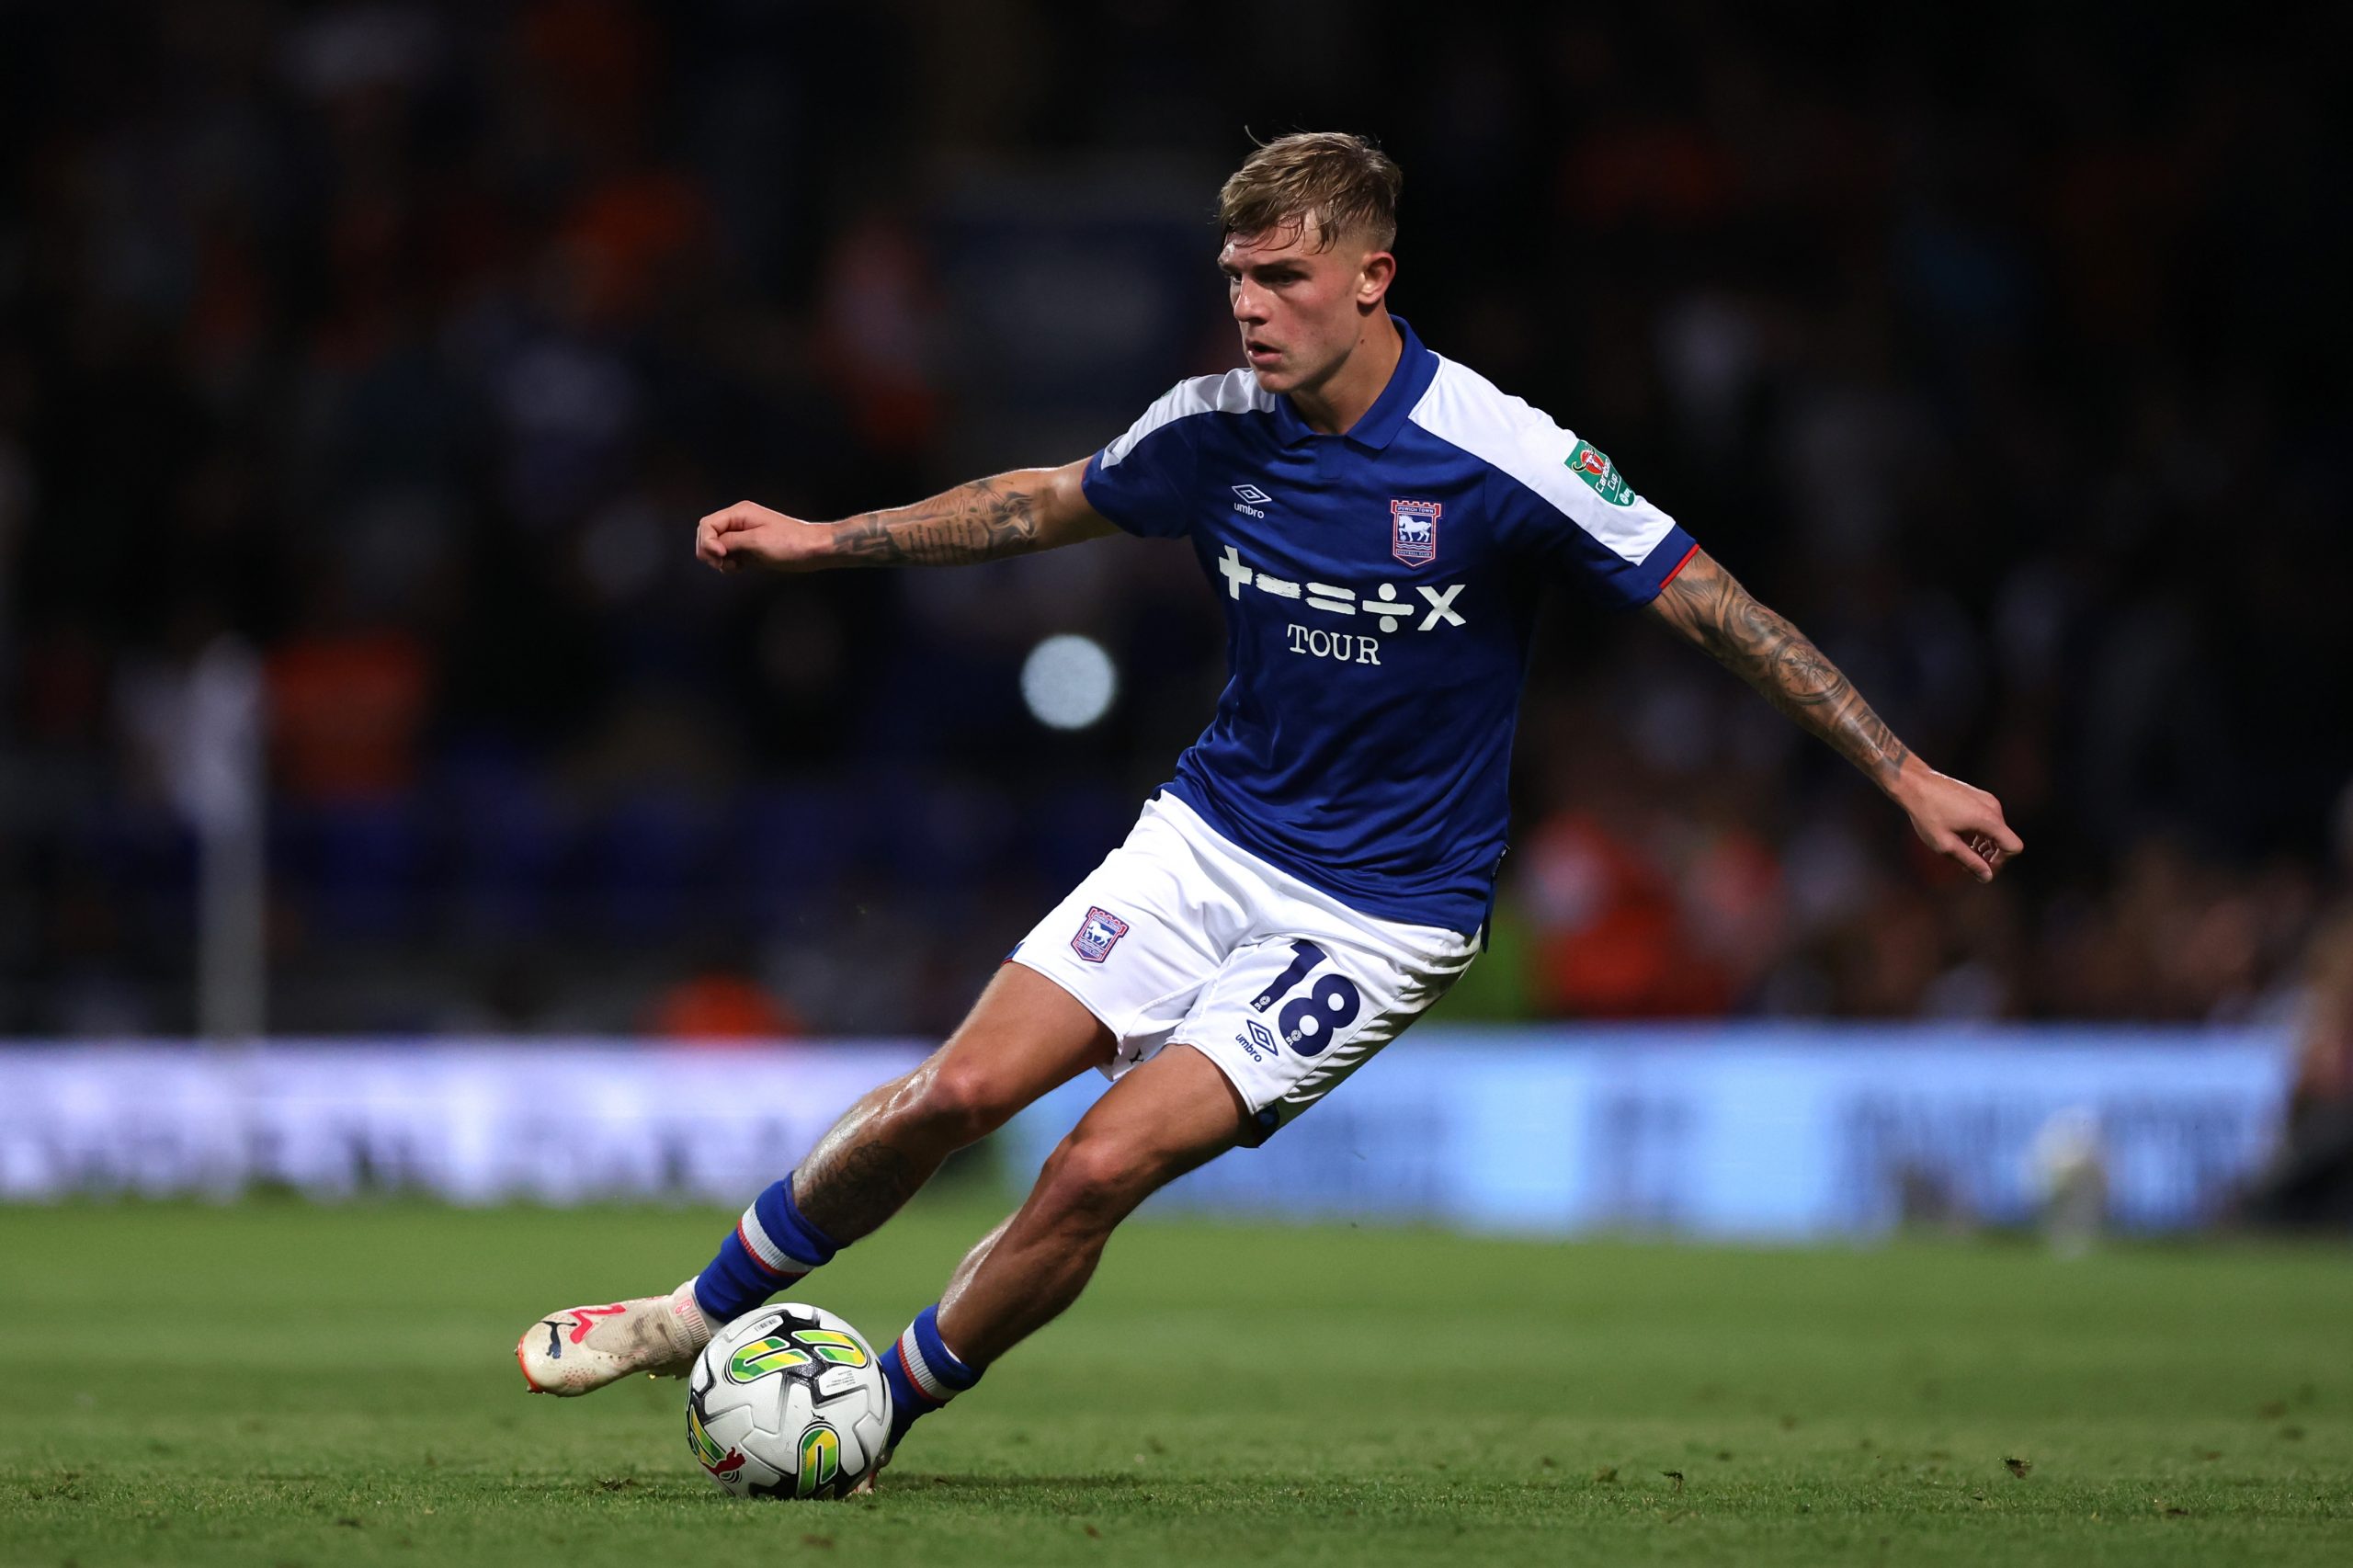 Ipswich Town boss has shed light on the Brandon William situation at Manchester United.